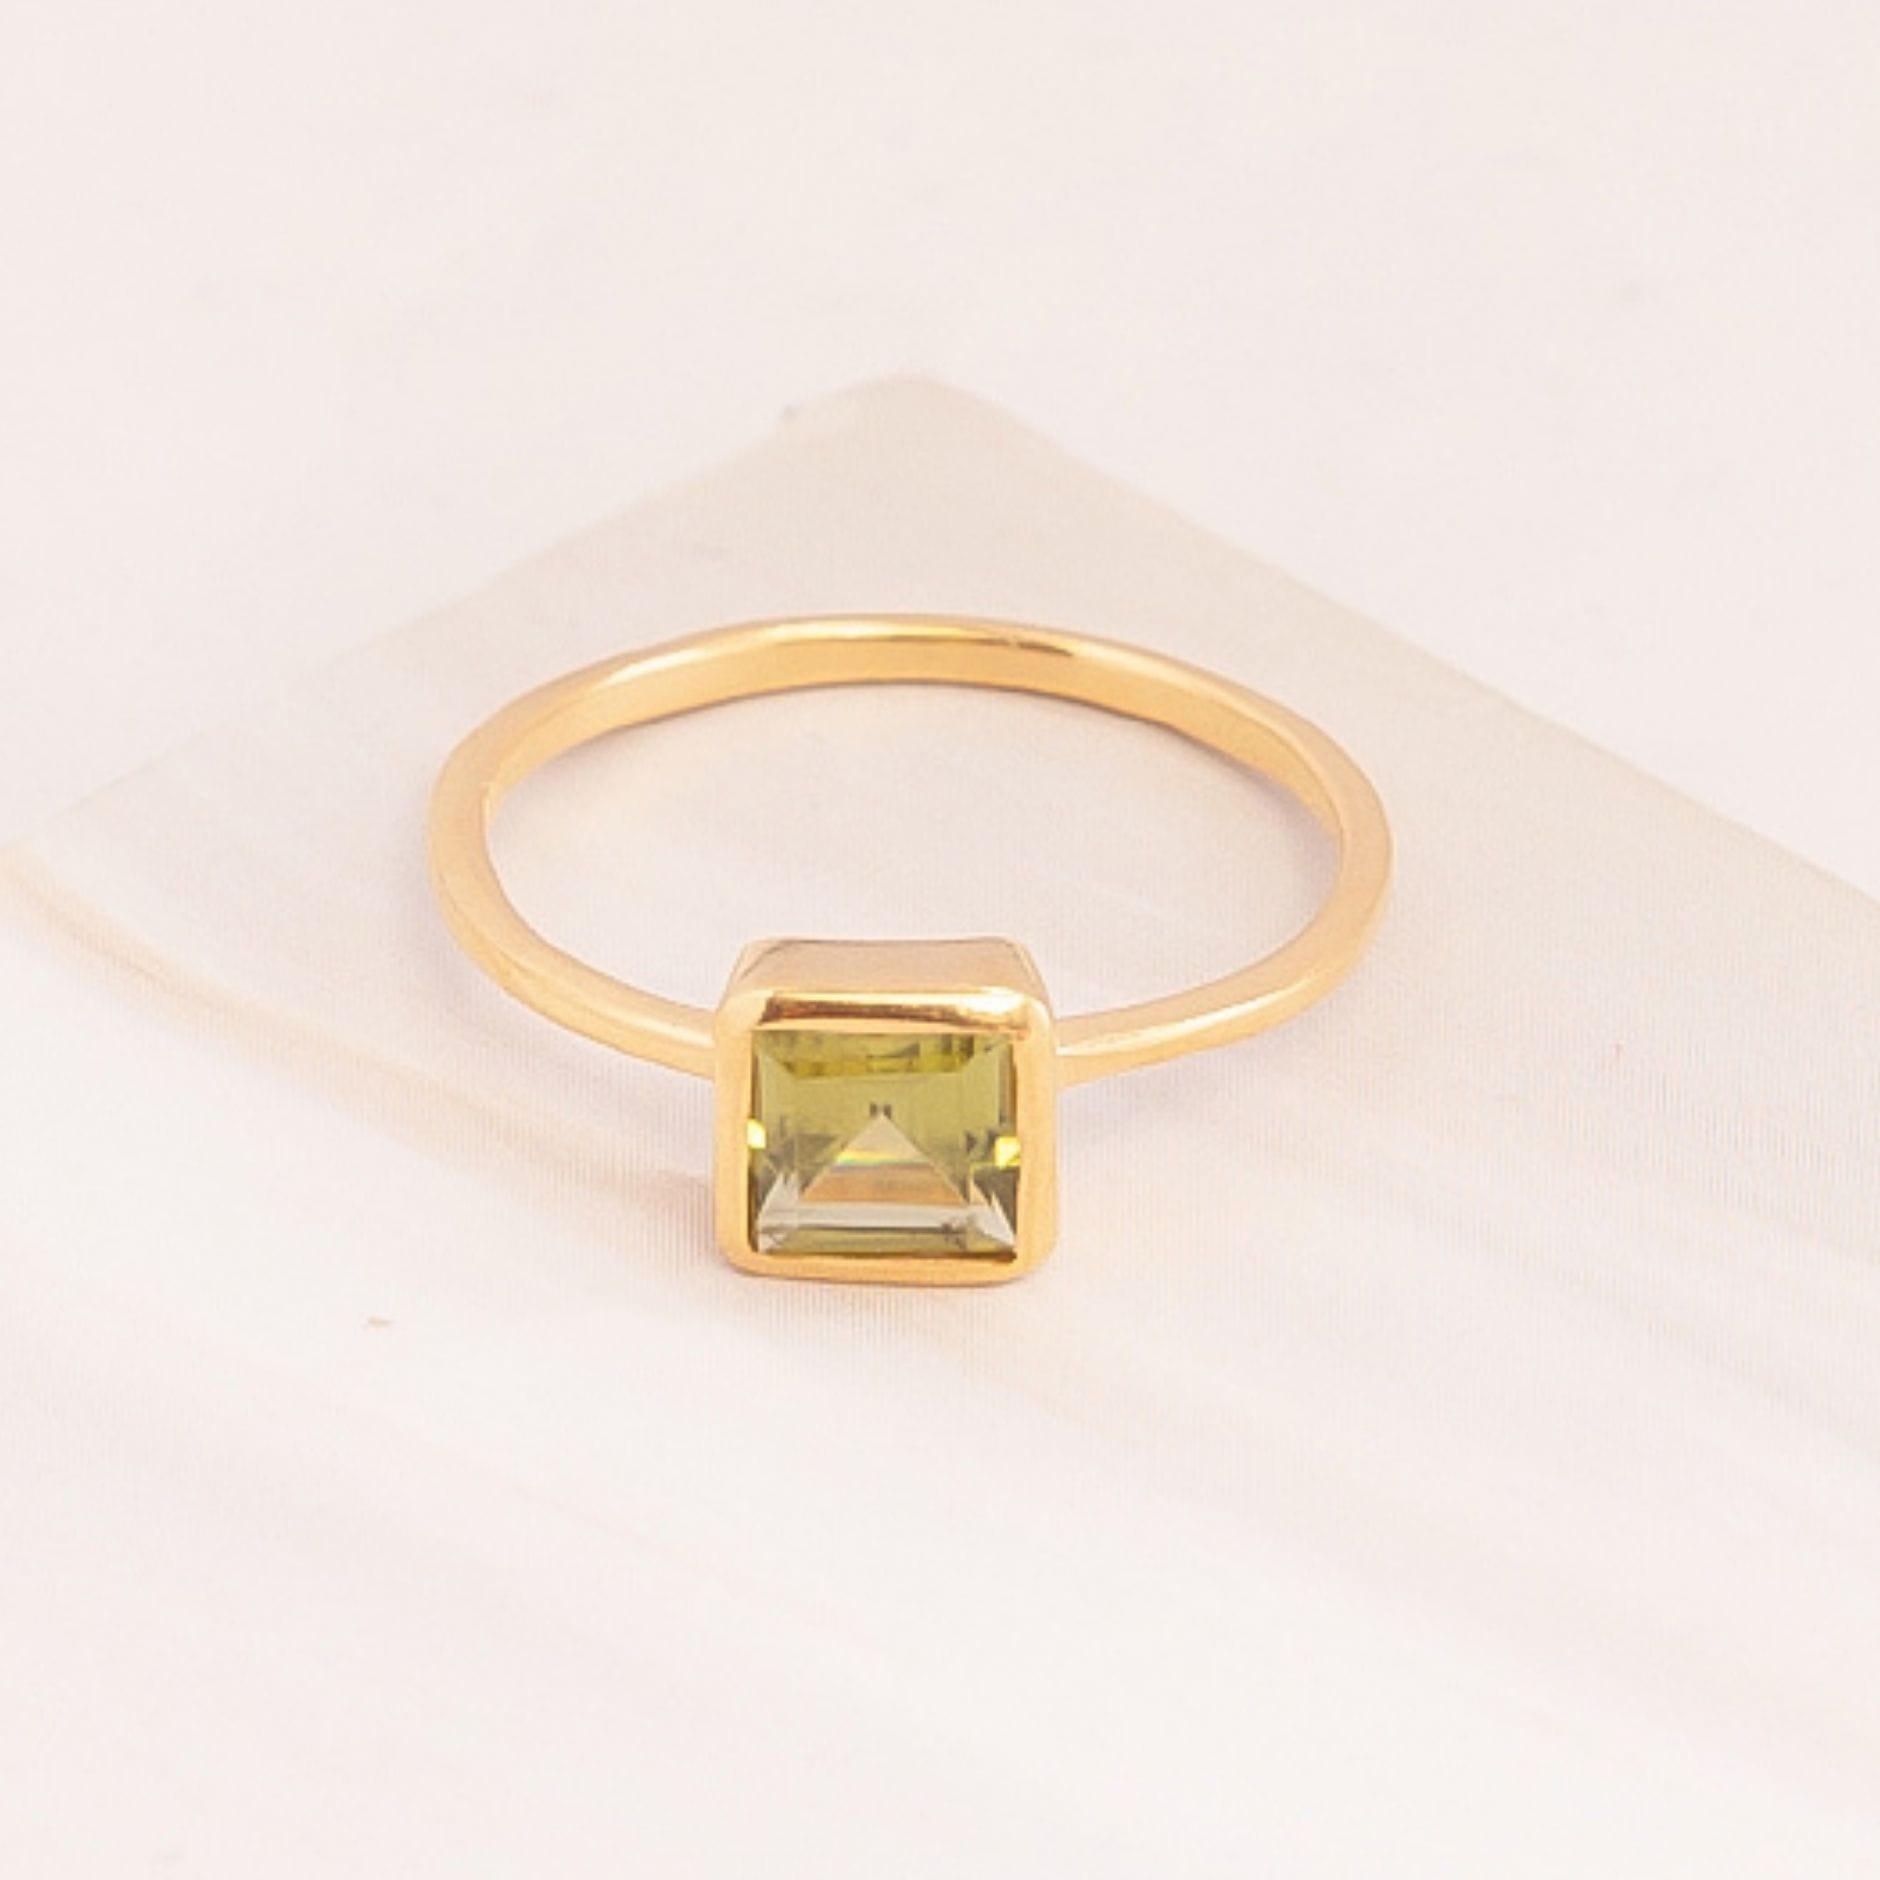 Emblem Jewelry Rings Green Peridot / Square Signature Candy Gemstone Stack Rings (Ring Size 4)